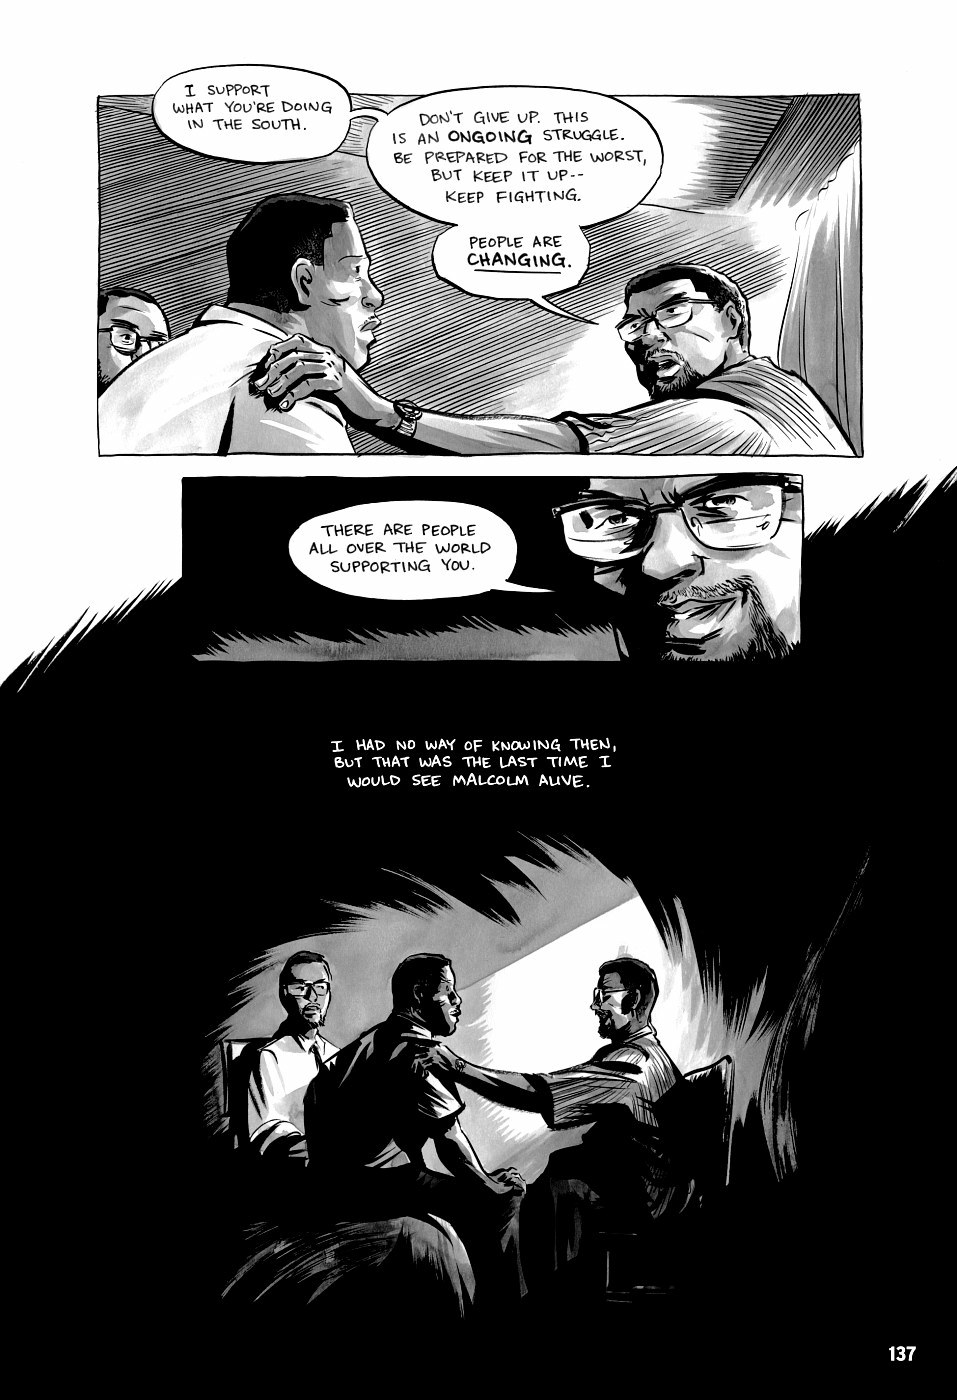 page 137 of march book three graphic novel